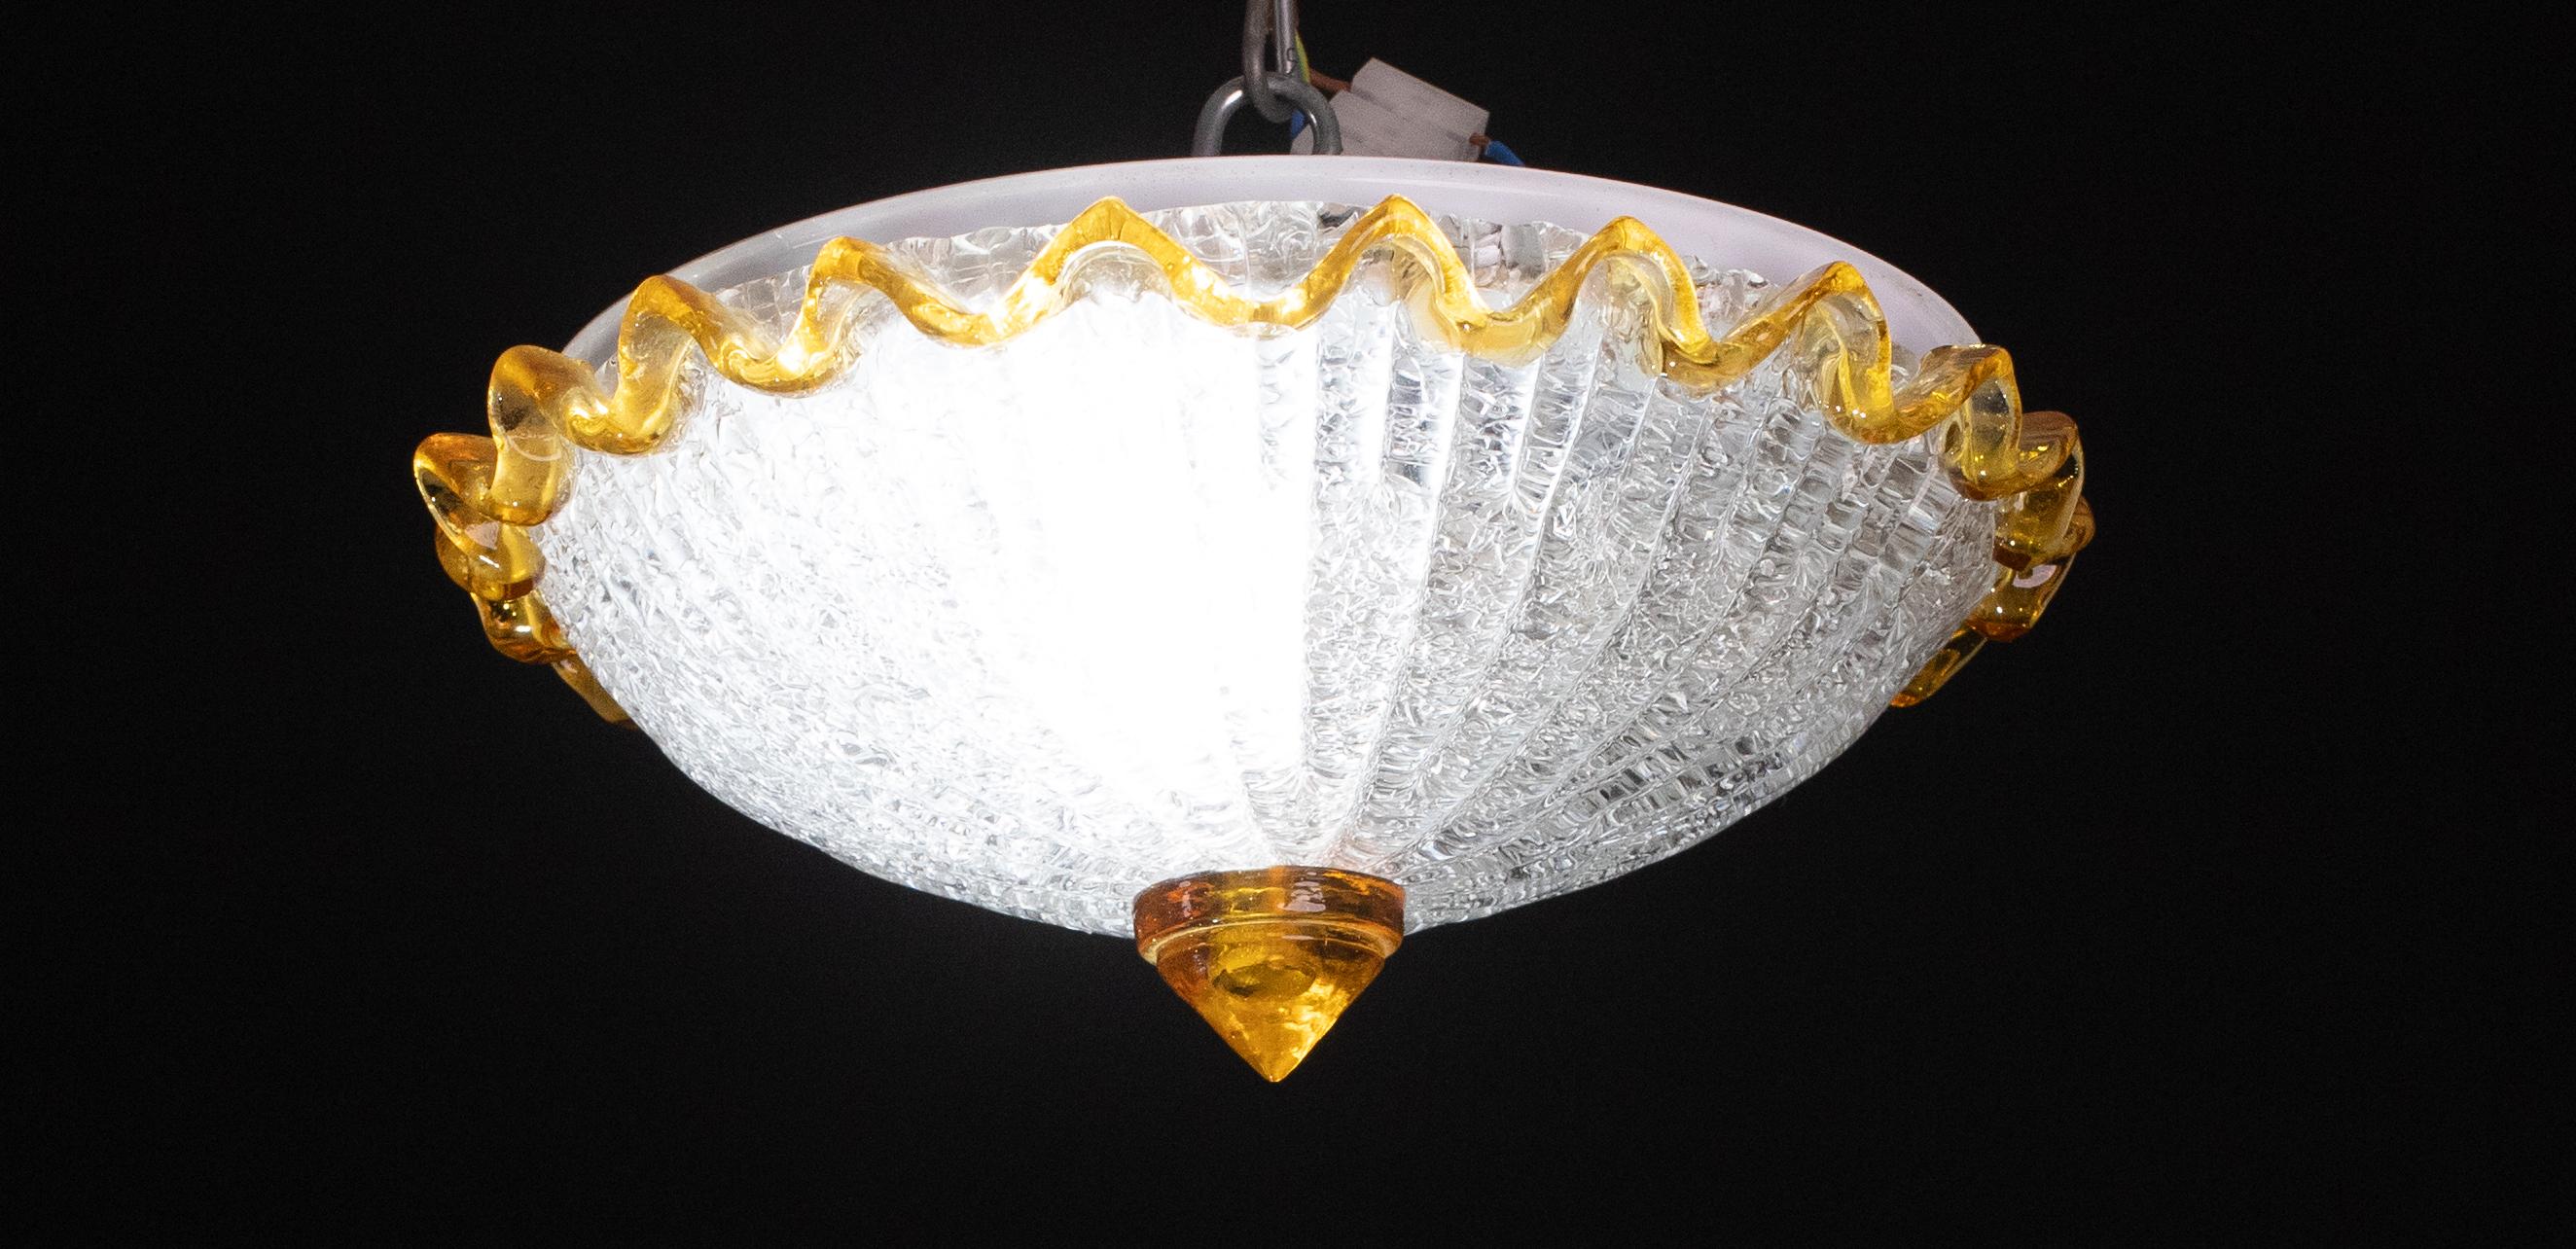 Stunning orange and transparentMurano ceiling light.
The ceiling light consists of two glass elements, the central plate plus the orange low element.
The central plate is surrounded by a wavy orange stripe typical of Venetian\Murano workmanship.
The